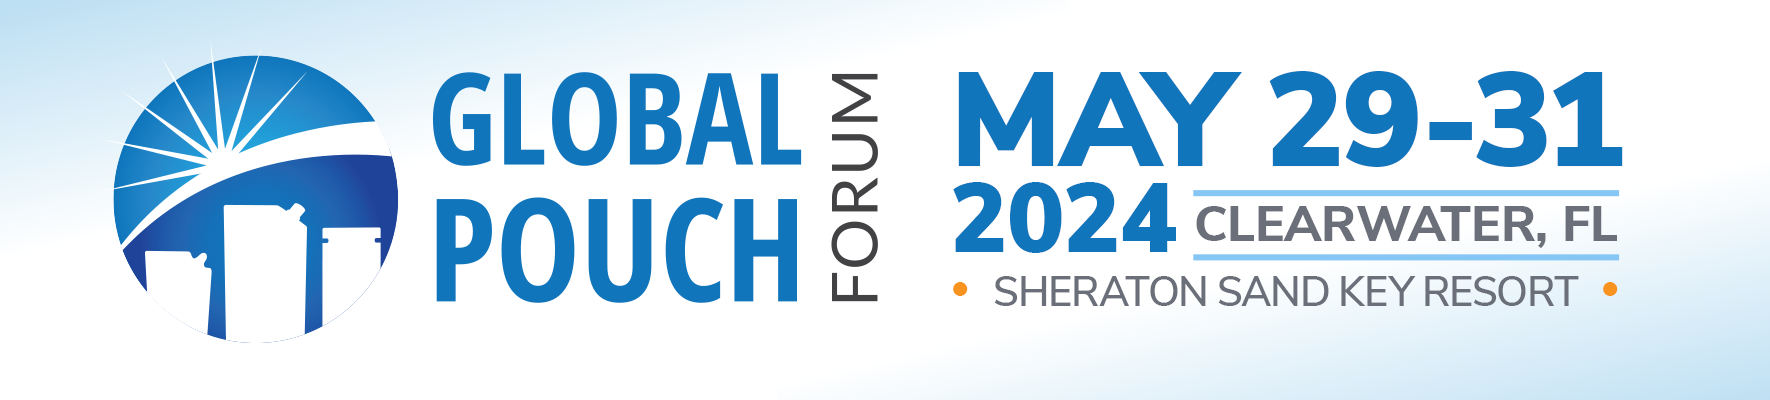 Global Pouch Forum presented by Packaging Strategies